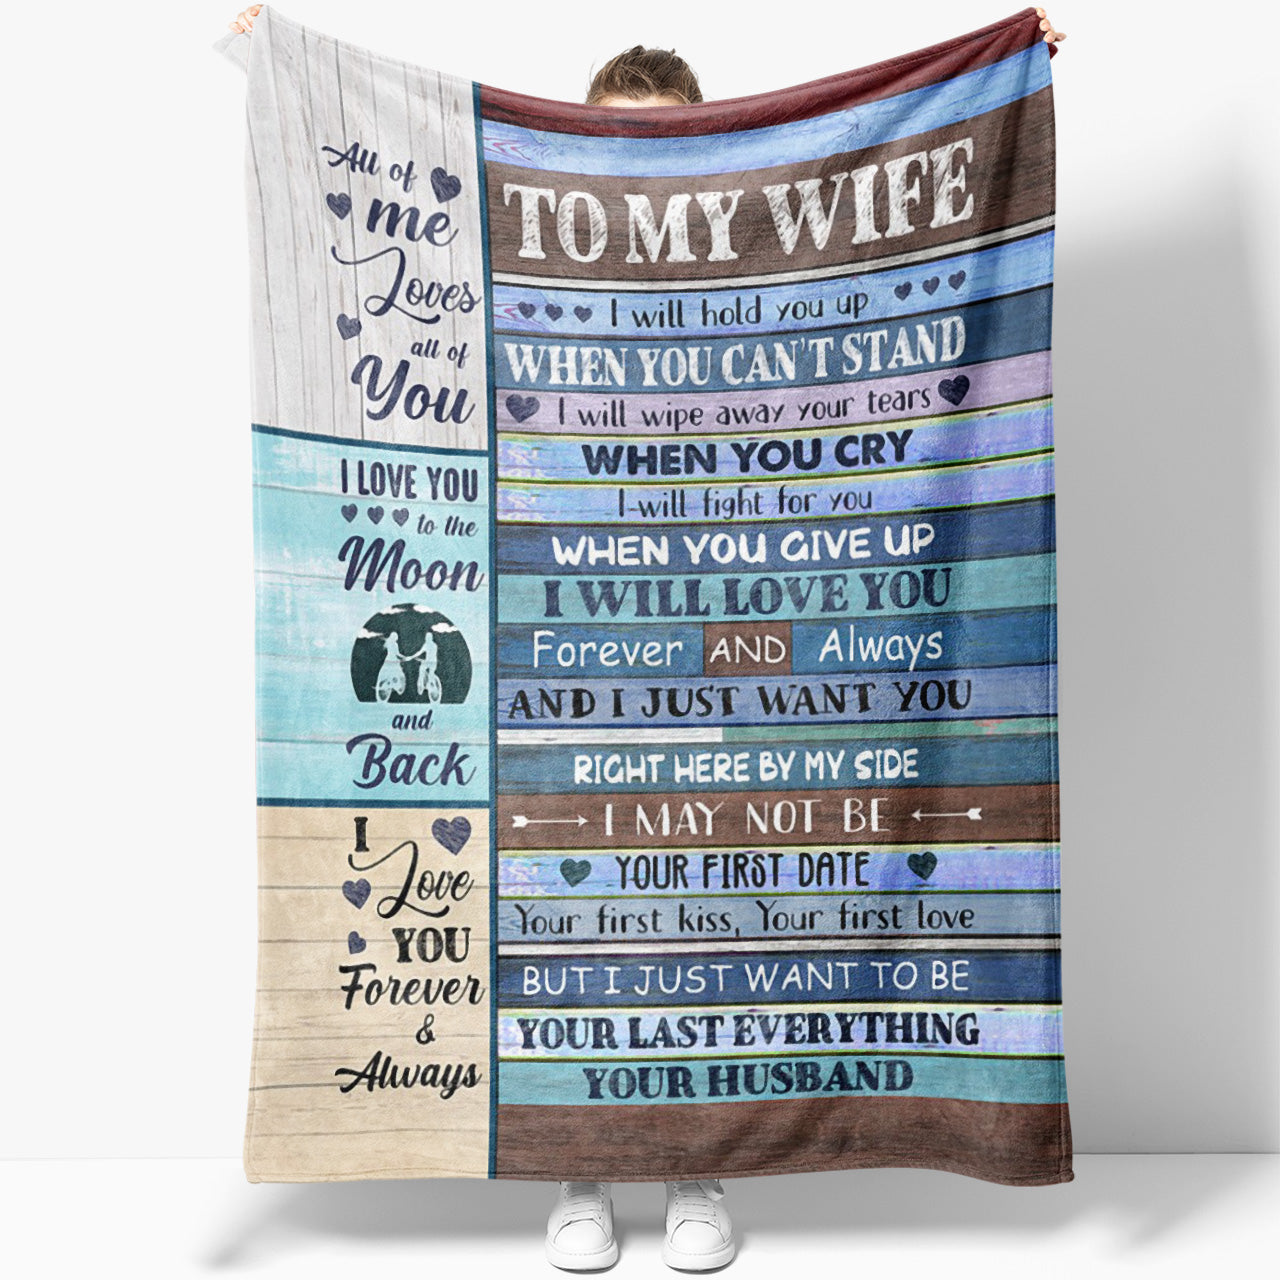 Blanket Gift For Wife, Gift Ideas For Her, Unique Gifts For Wife, I Will Hold